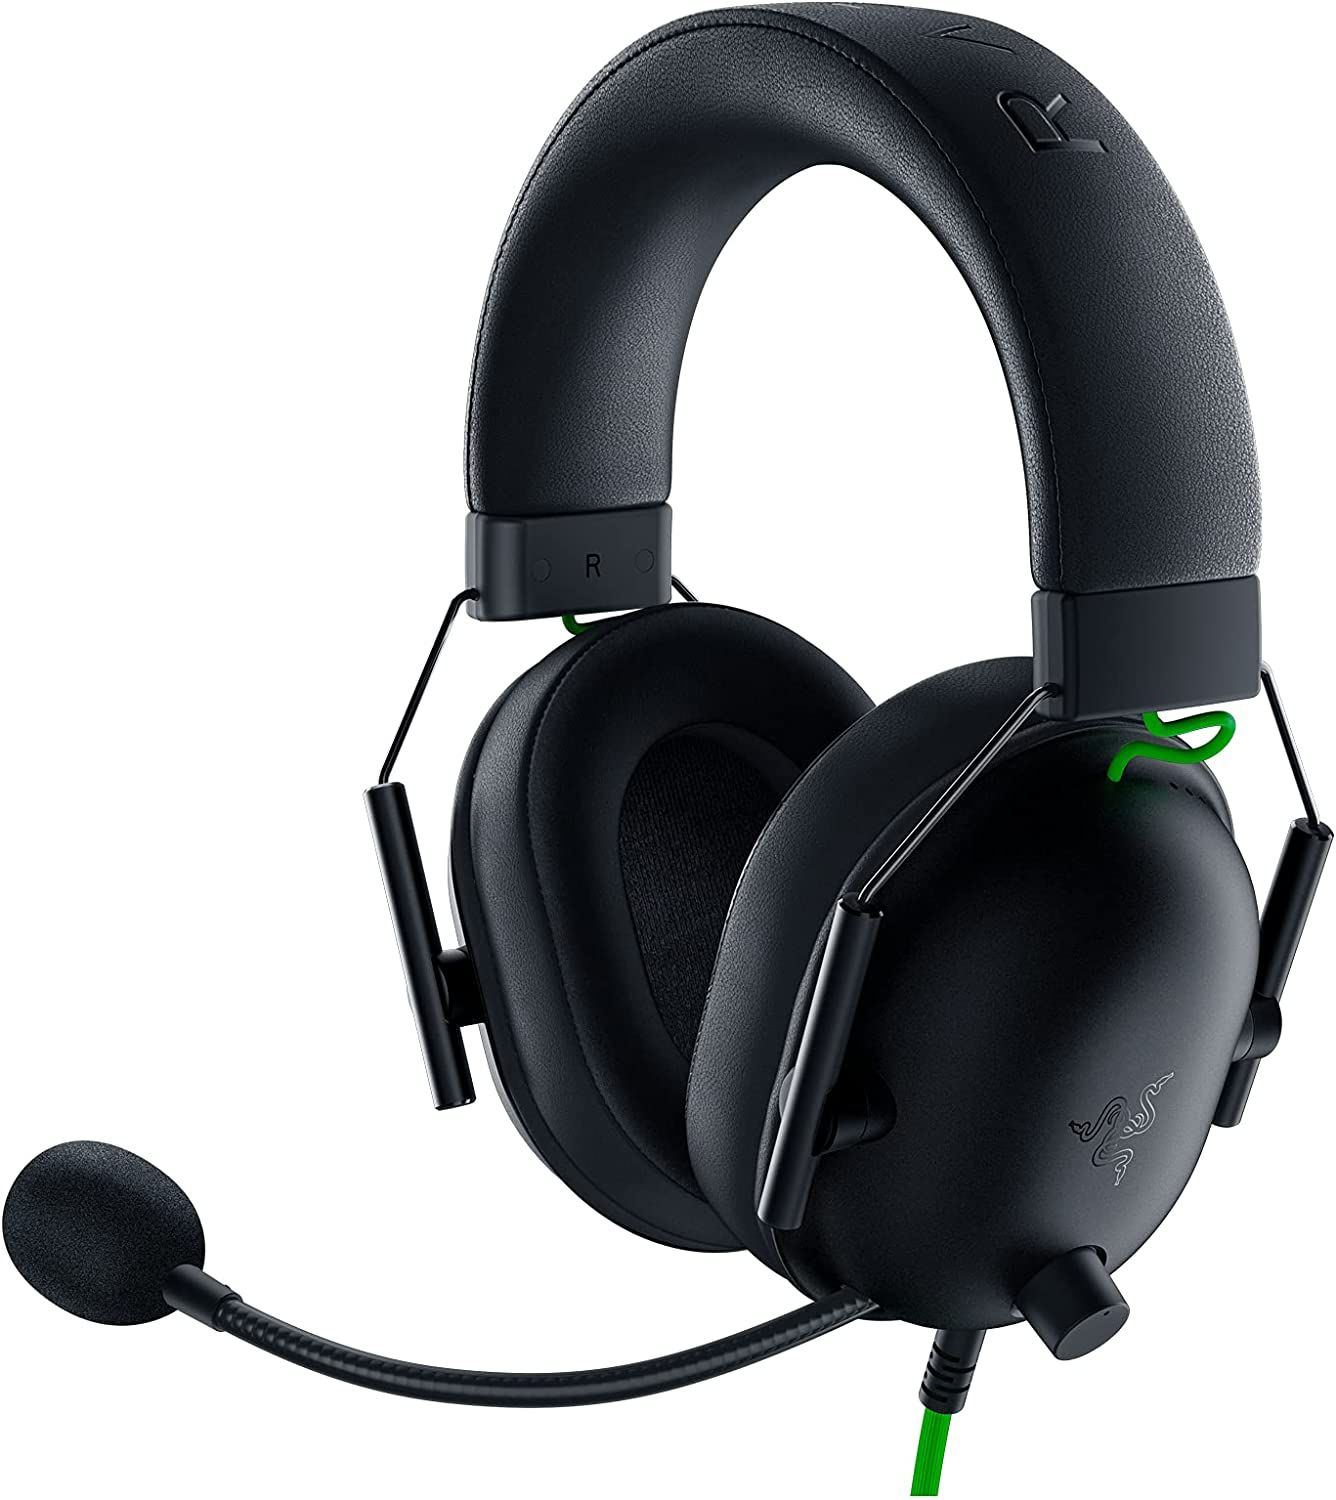 Logitech G Introduces the G335 Wired Gaming Headset, a Fresh and